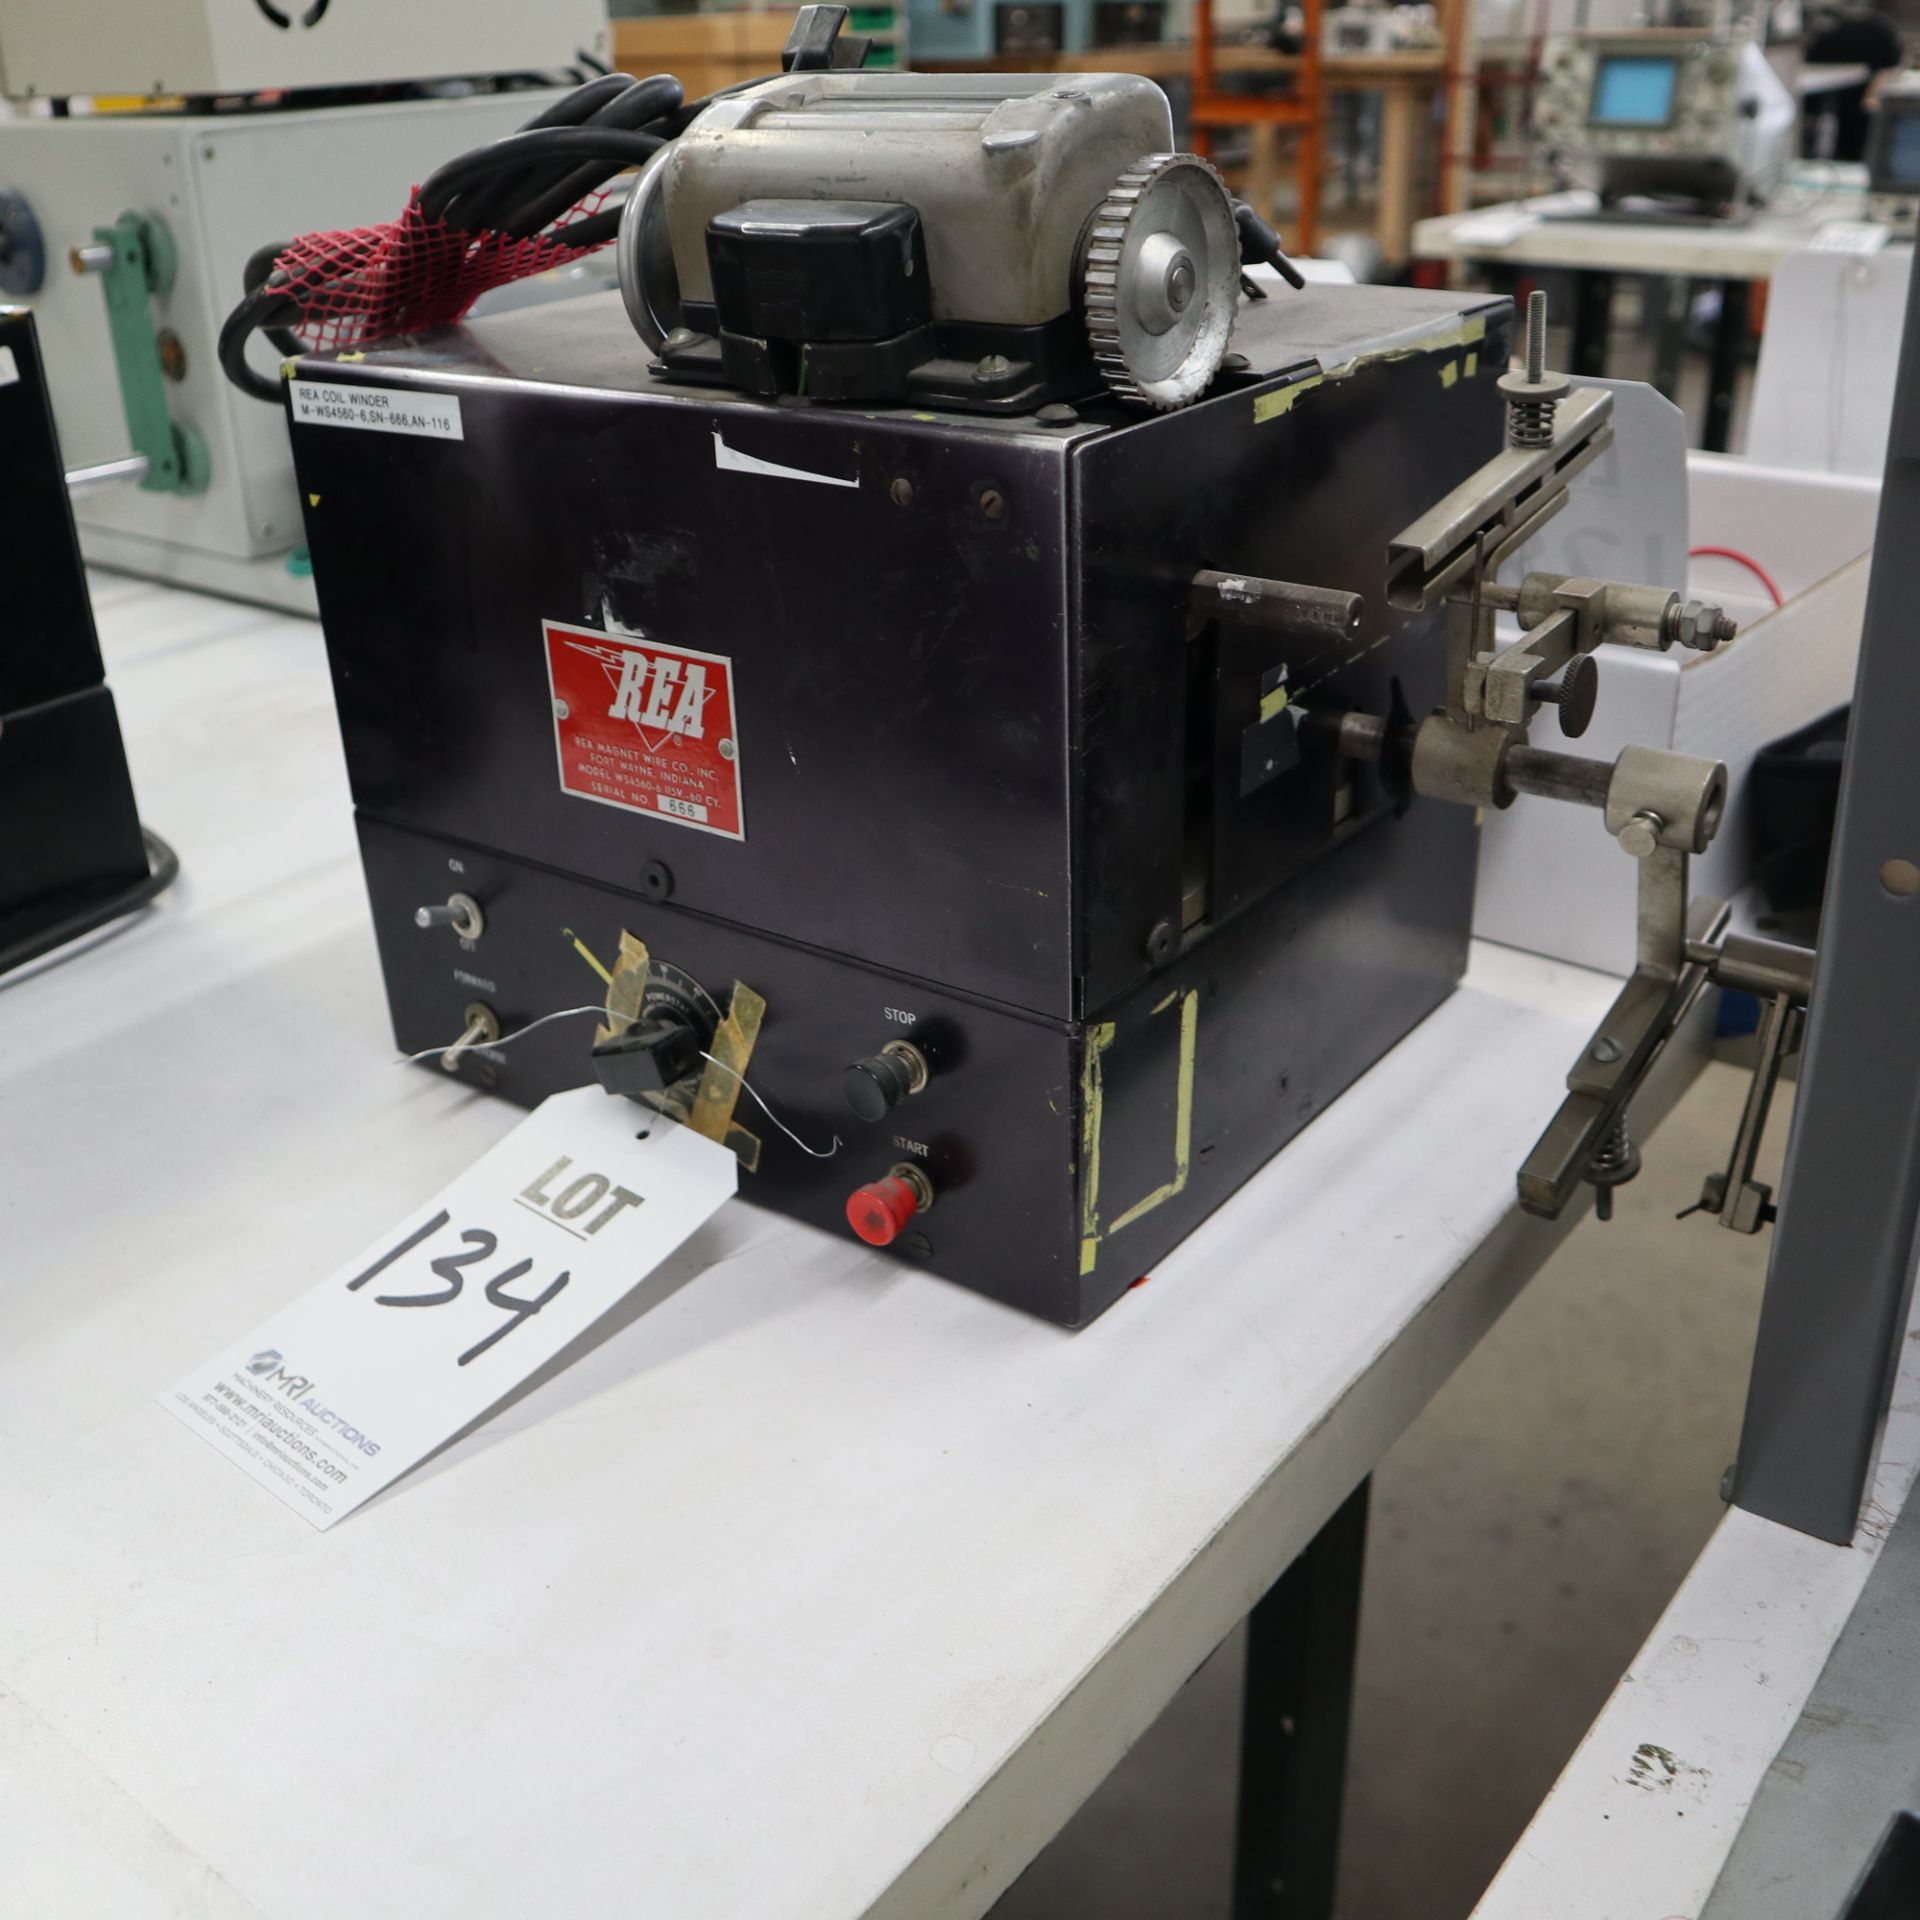 REA ULTRA FINE WIRE COILING MACHINE, S/N 666 - Image 2 of 3